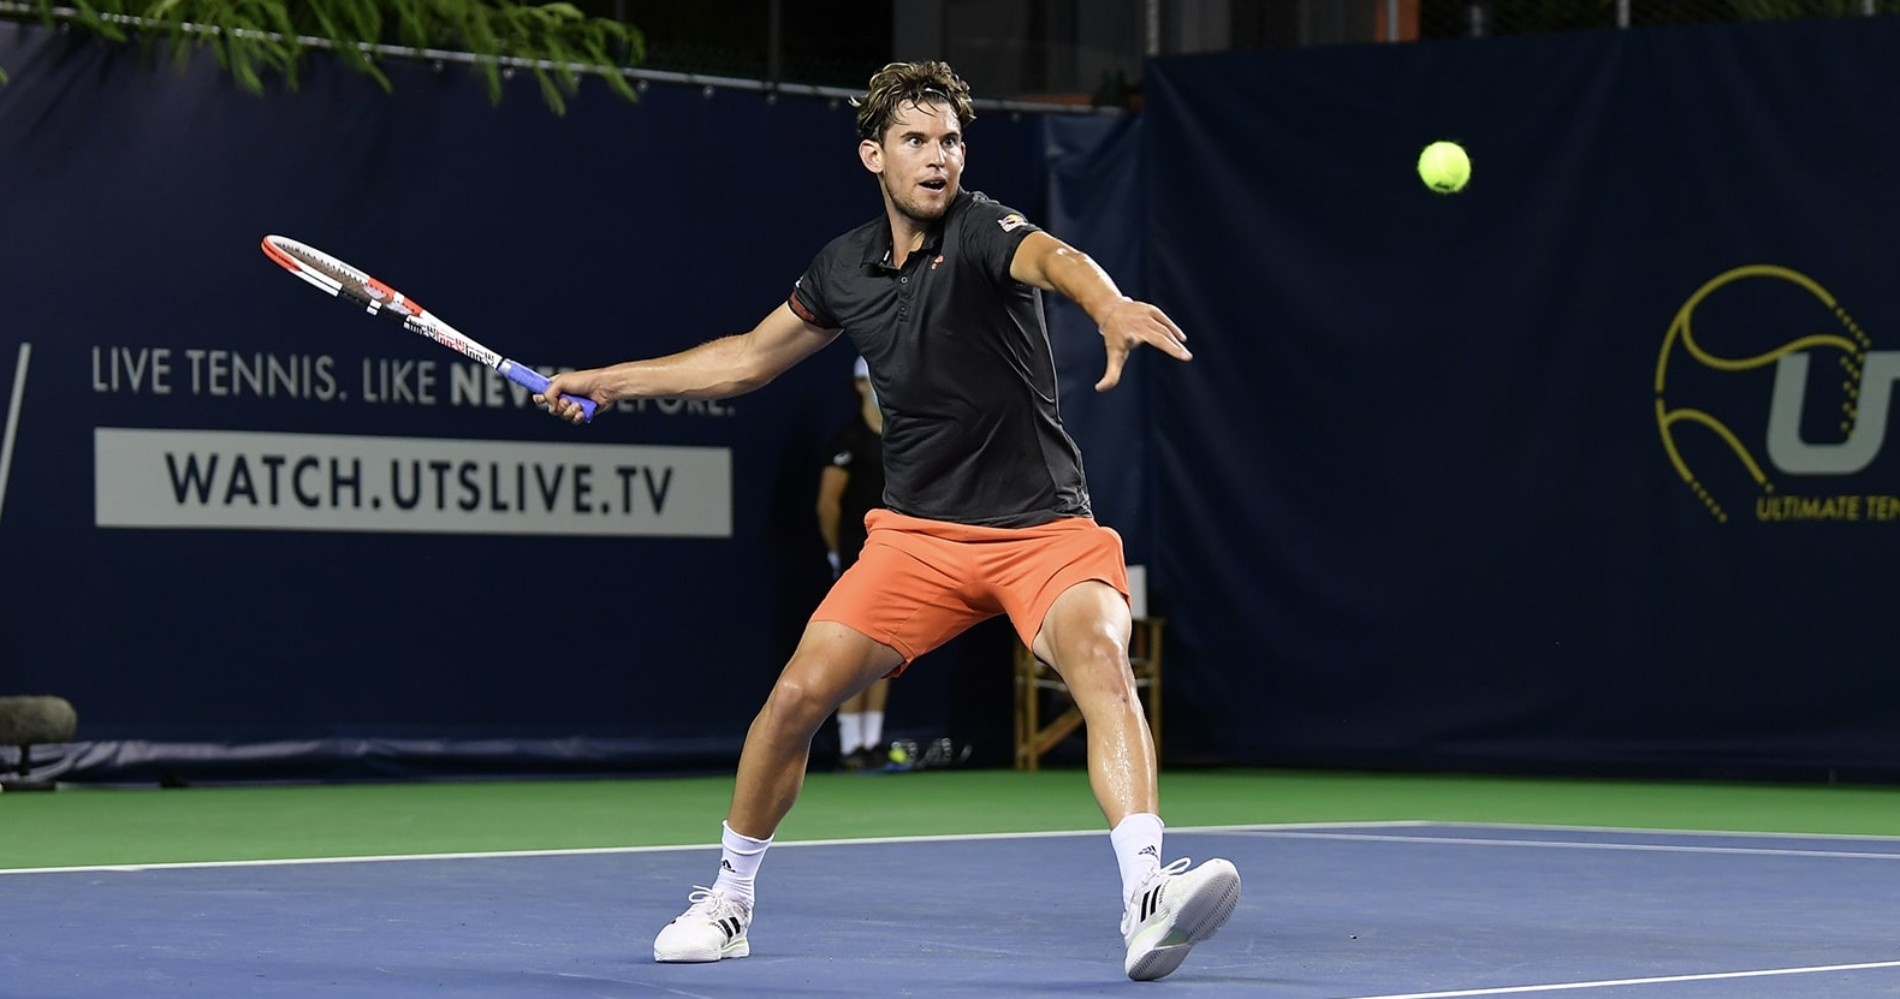 Thiem breaks down Goffin’s Wall to seal second UTS win